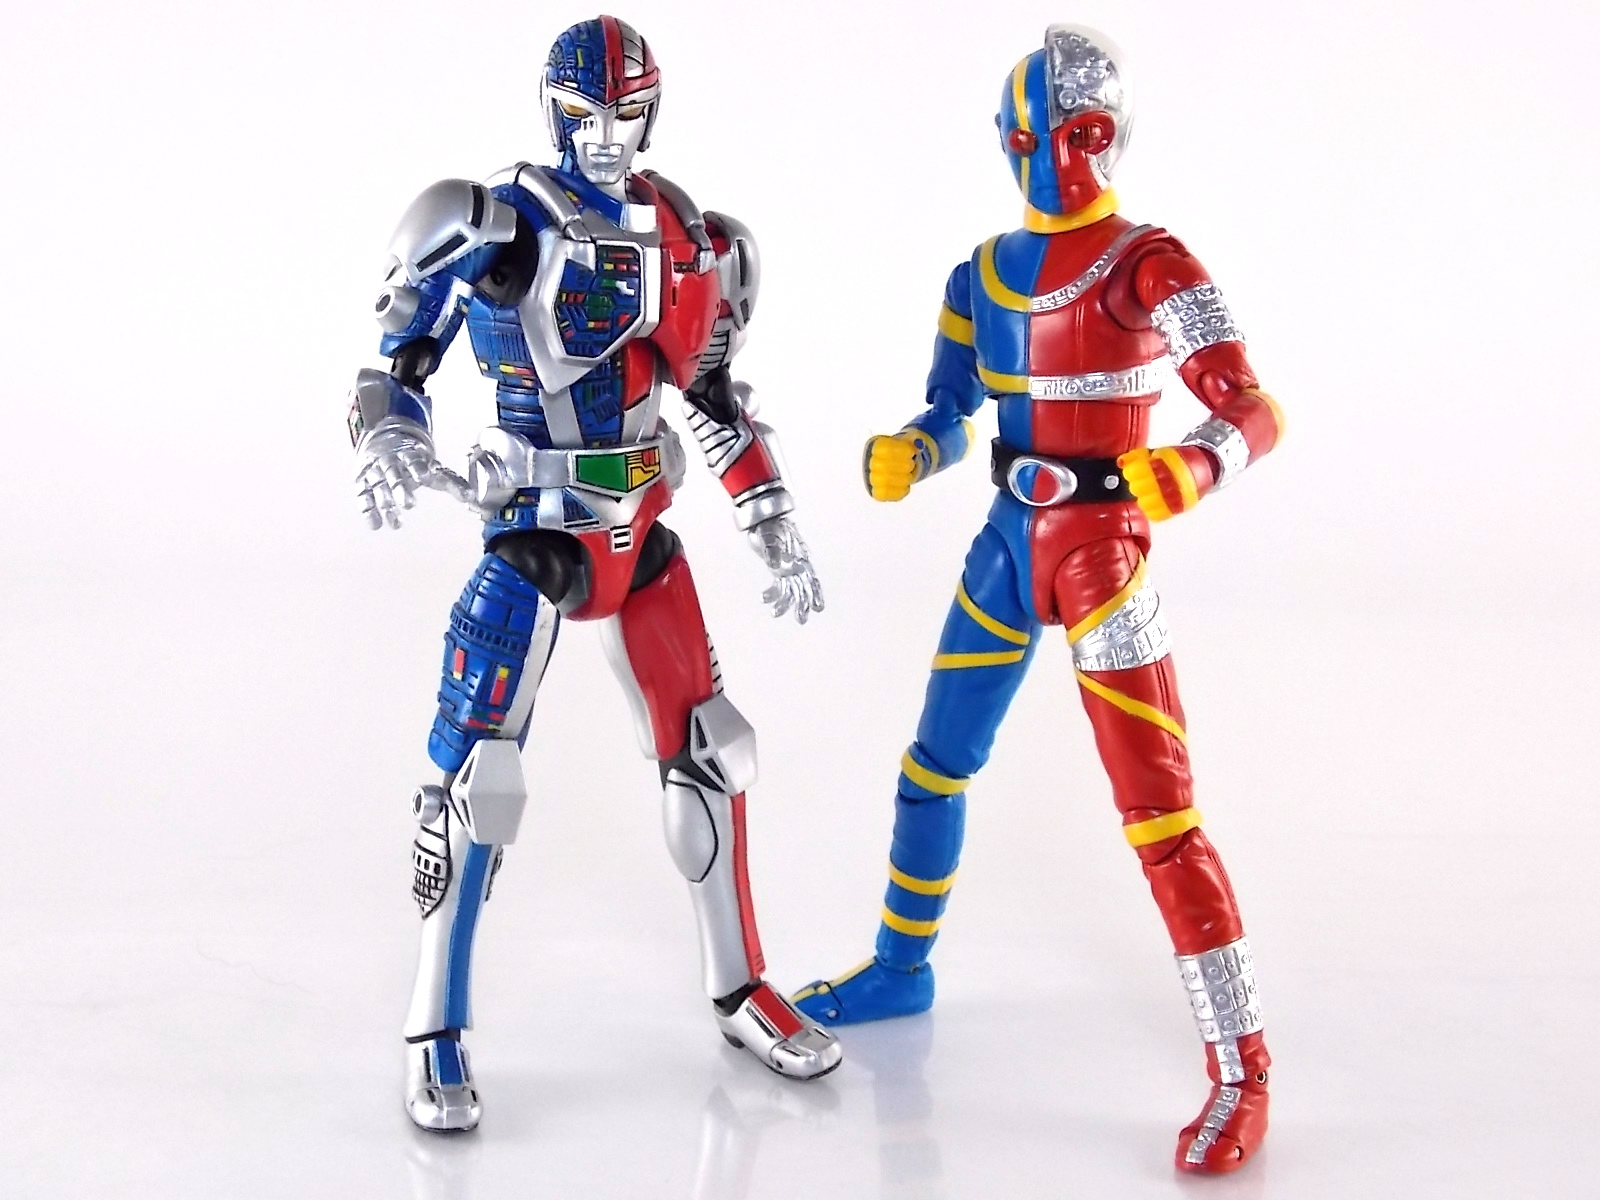 S.H. Figuarts Kikaider Gallery - Additional Images.